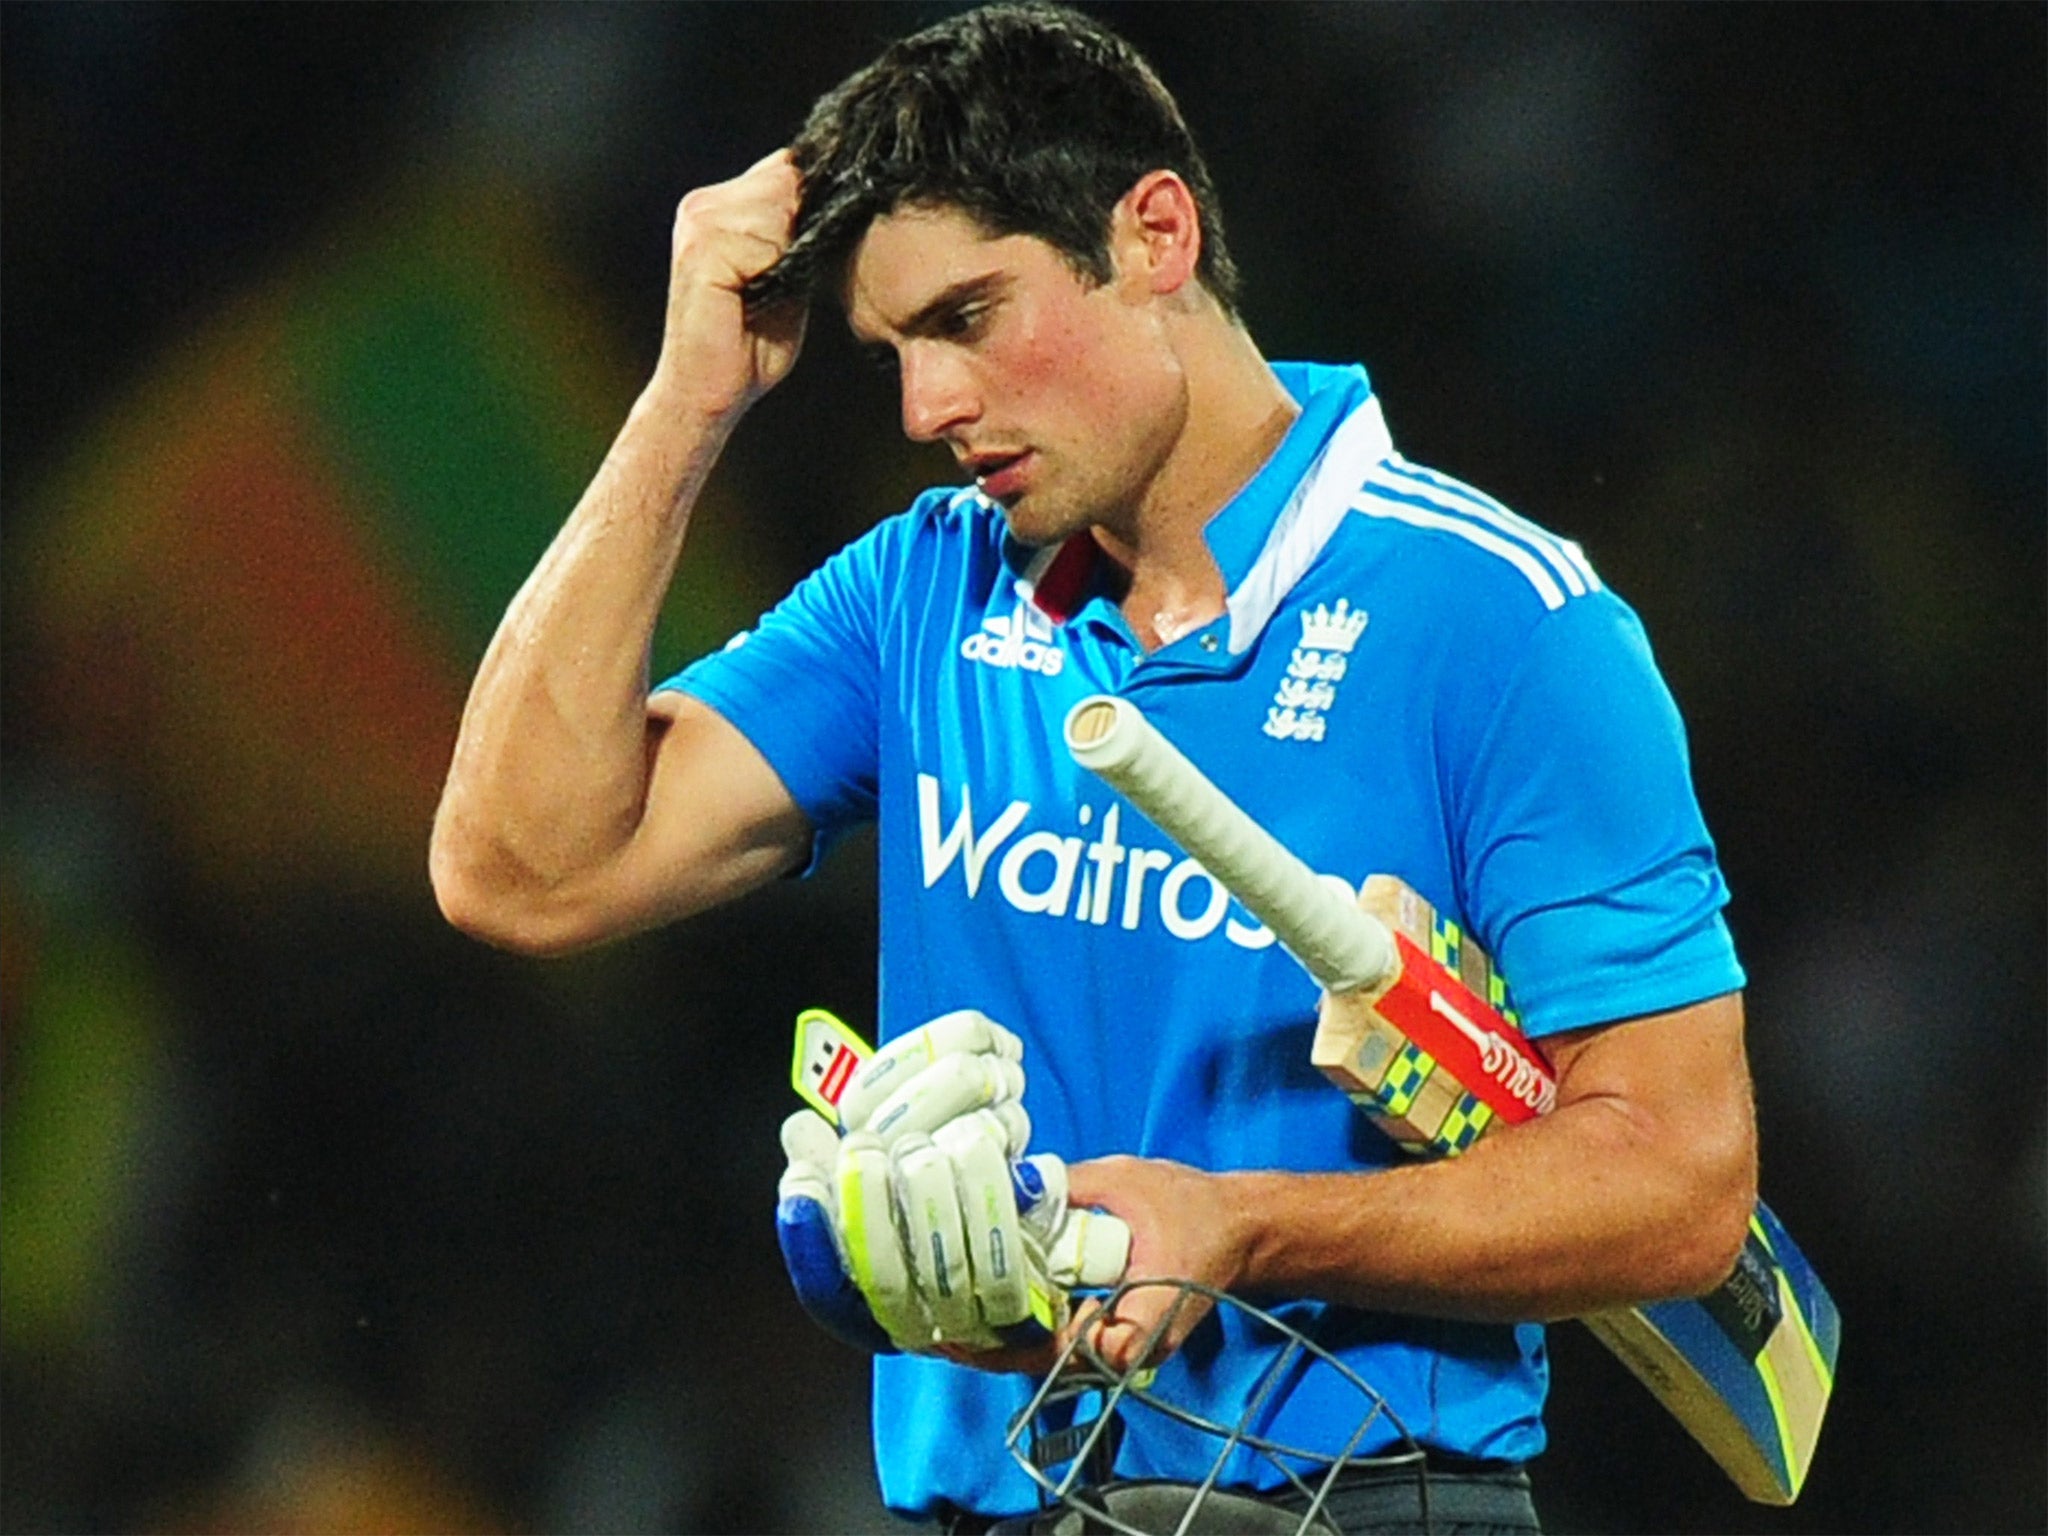 After another poor series in Sri Lanka, Alastair Cook claimed all players go through a lean period